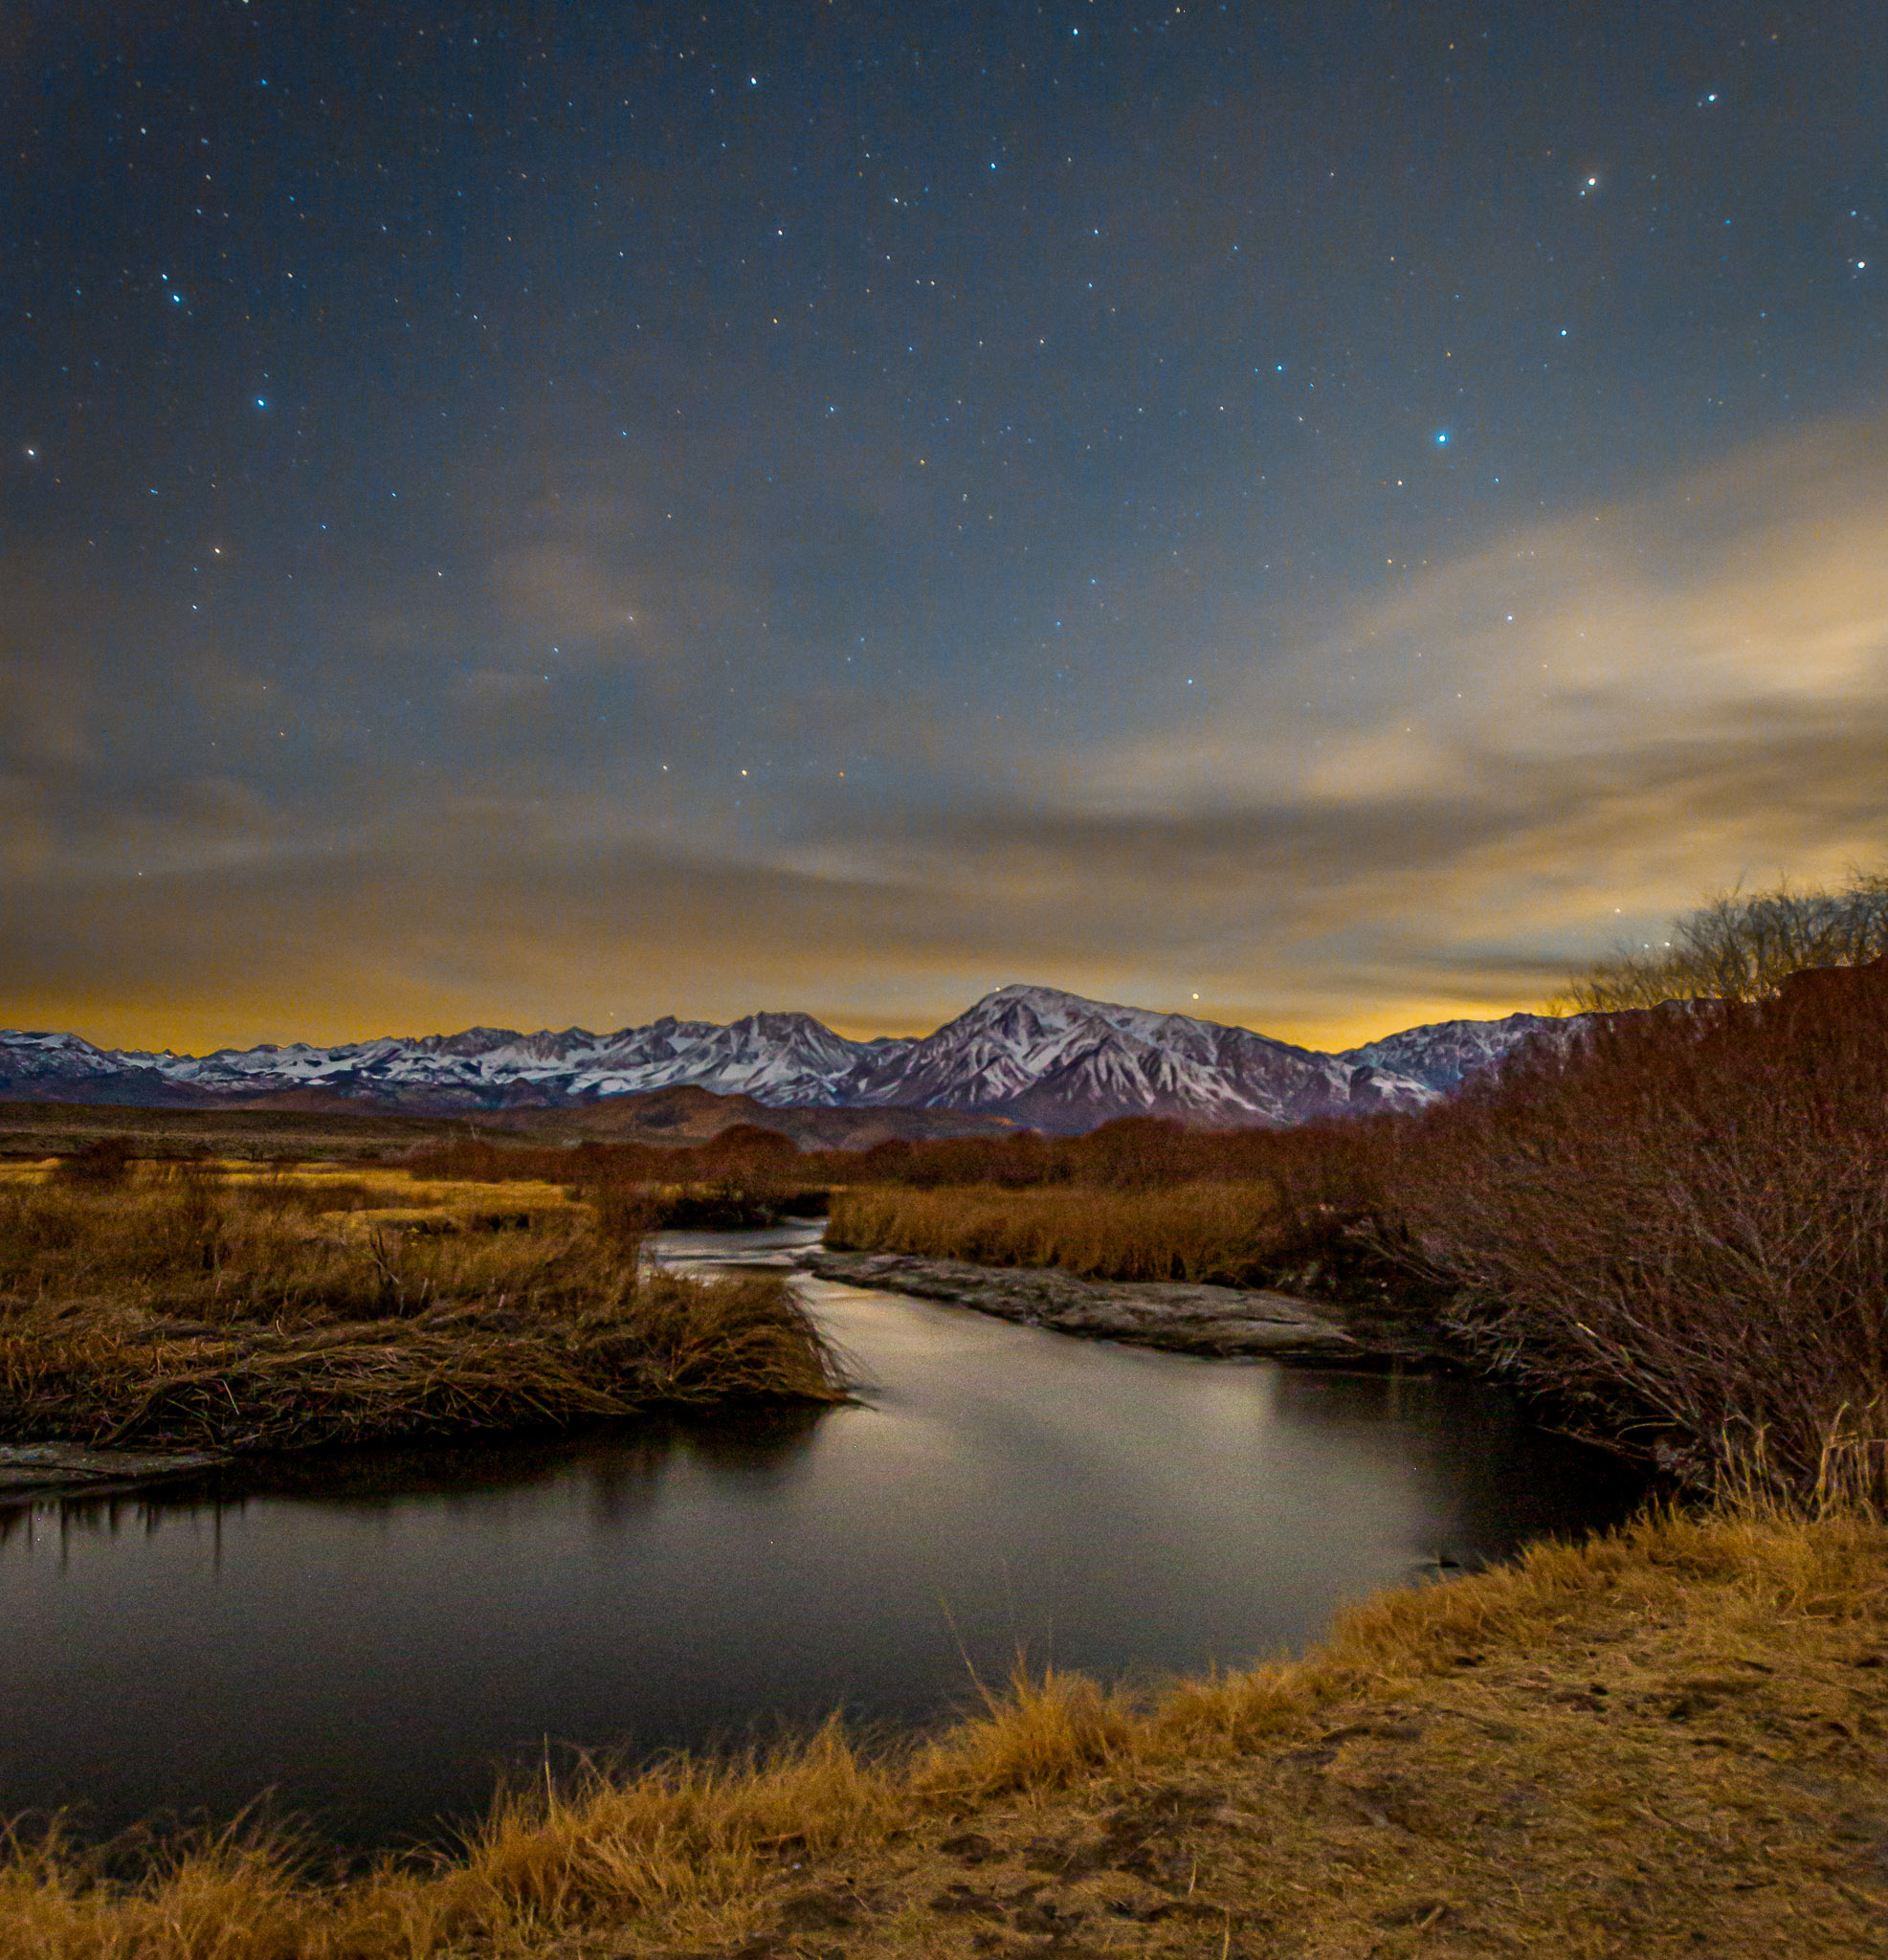 Owens River Moonset Afterglow, California